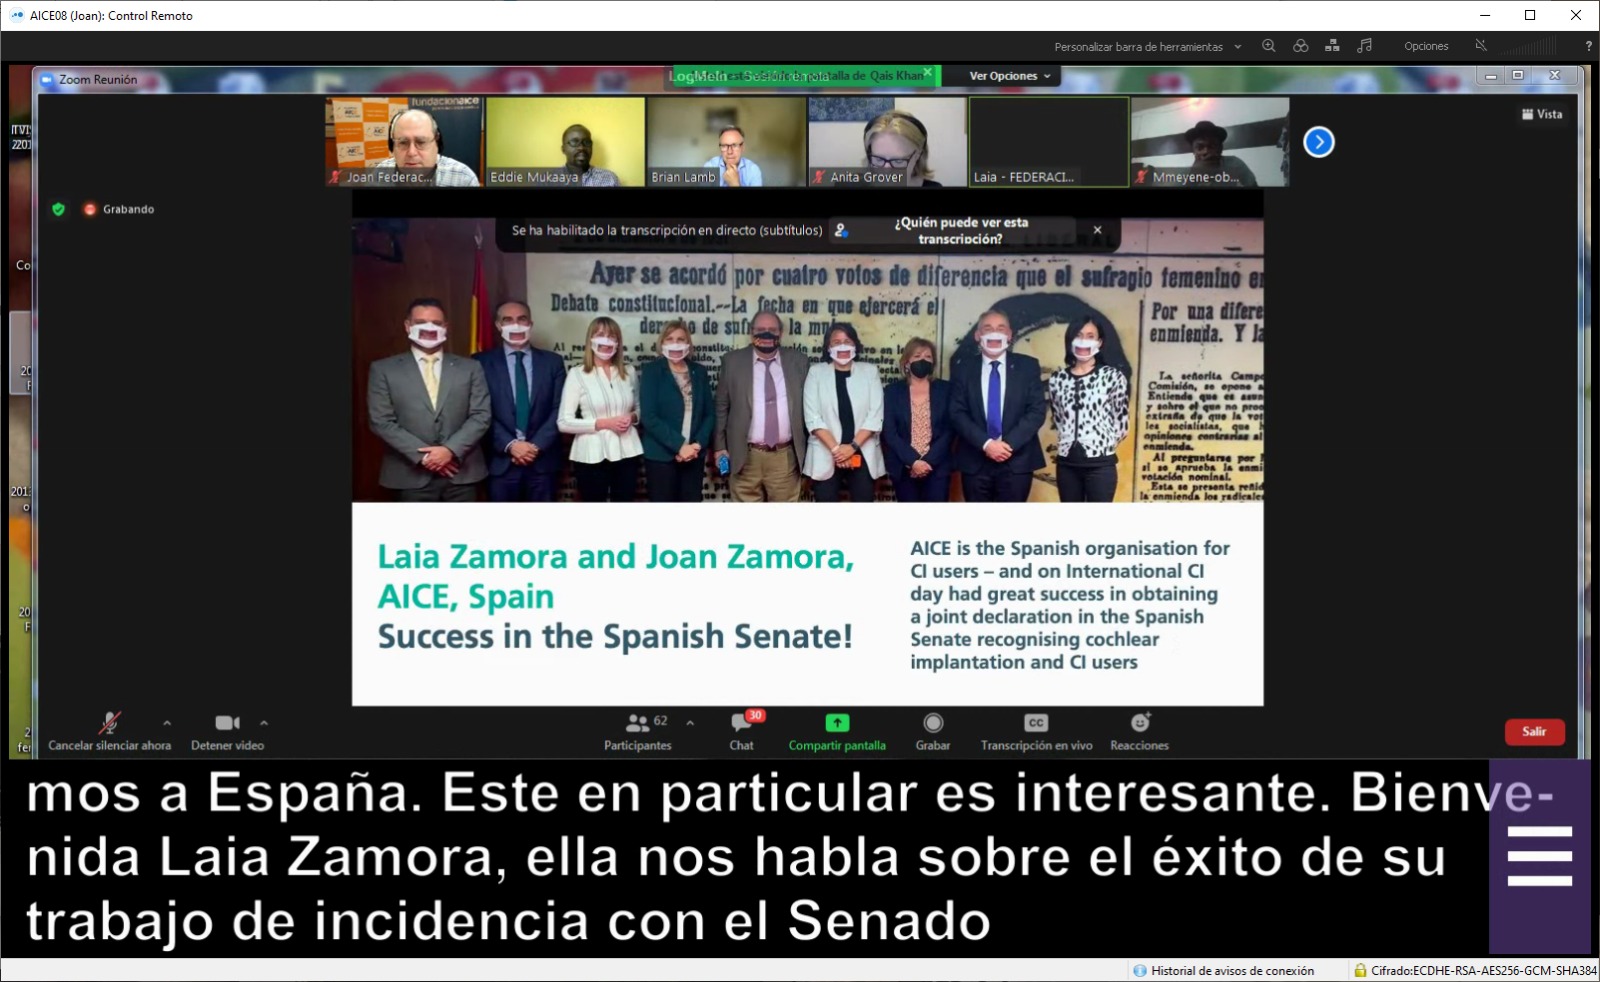 The Spanish Government recognises CI users and AICE